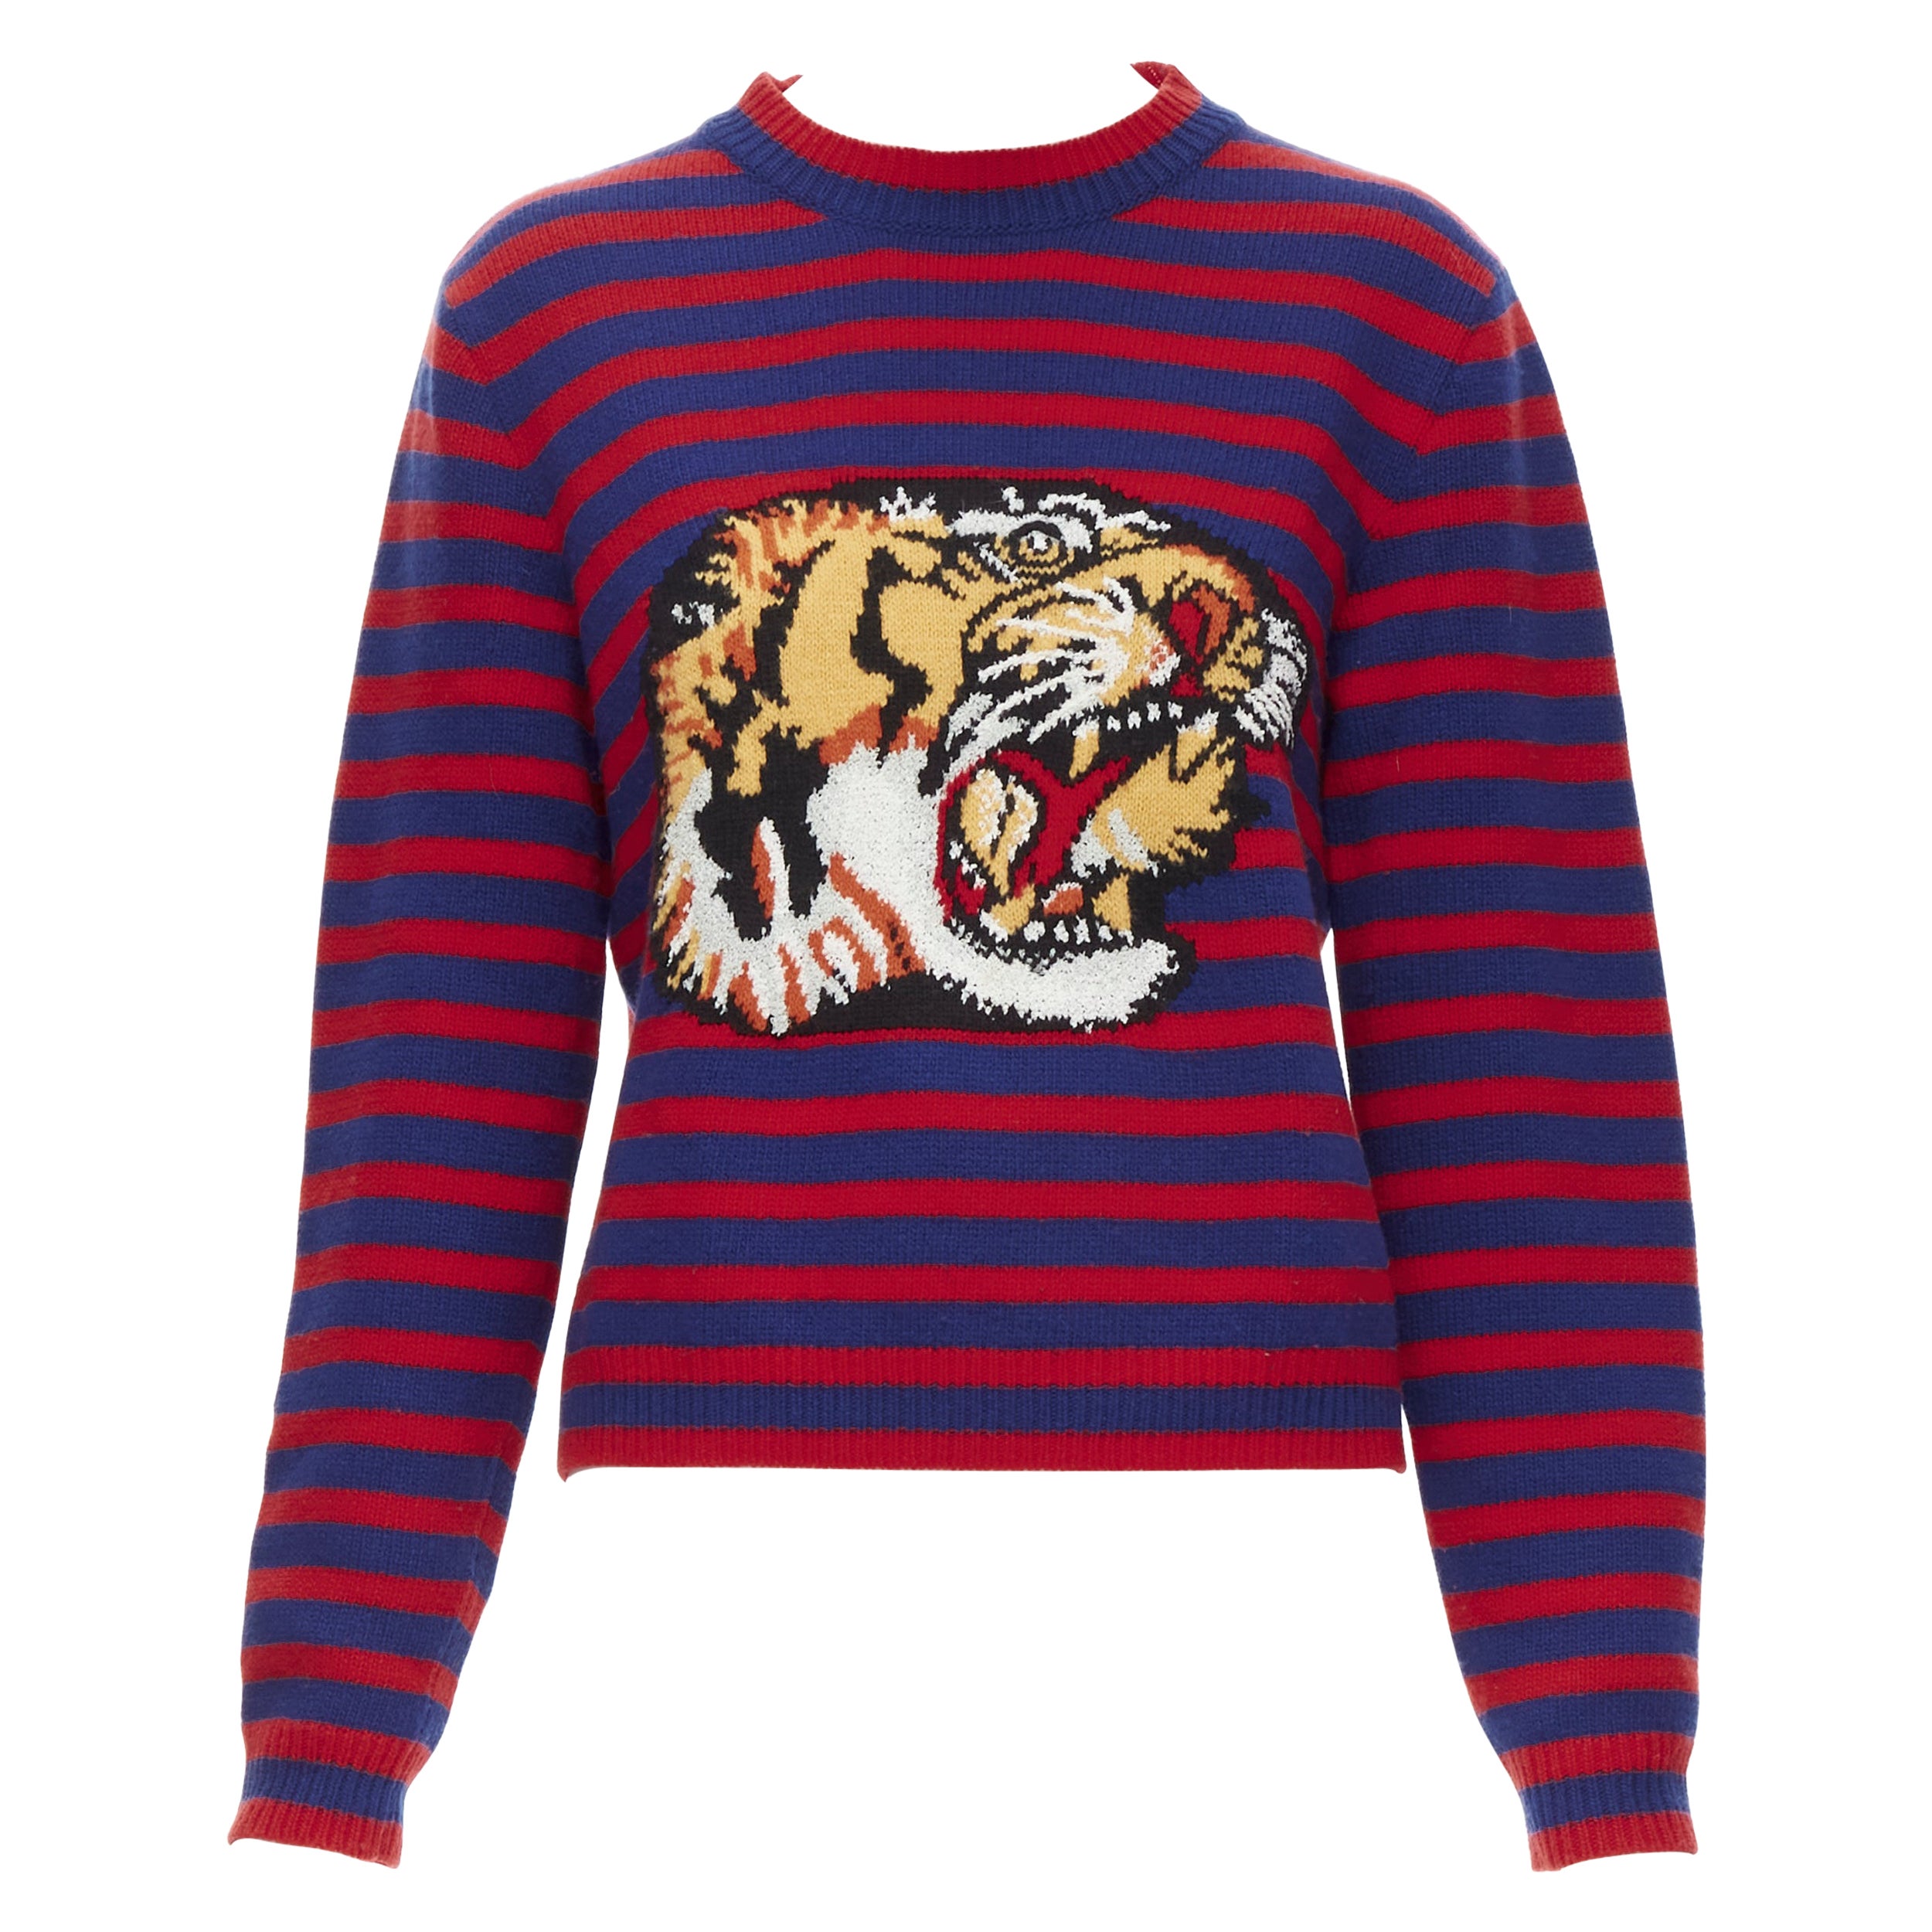 Gucci Tiger Sweater - 2 For Sale on 1stDibs | gucci tiger cardigan, tiger  sweater gucci, gucci sweater tiger